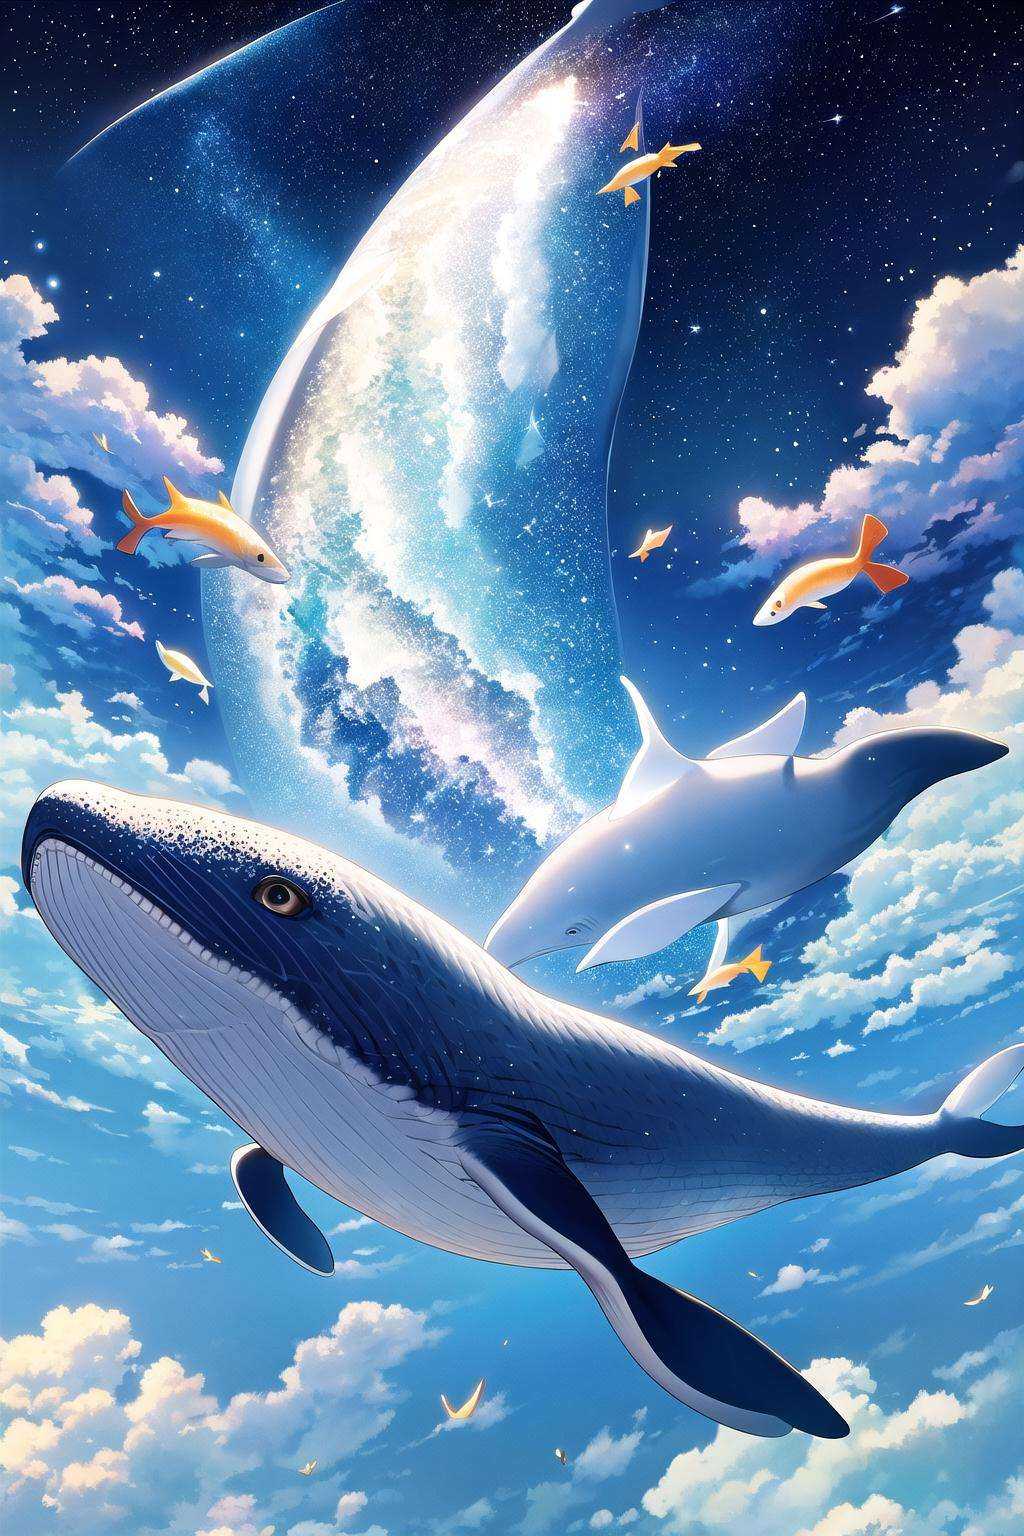 masterpiece, best quality, scenery, whale, fish, starry sky, galaxy, cosmos, fantasy, floating object|fish, backlight, shadow